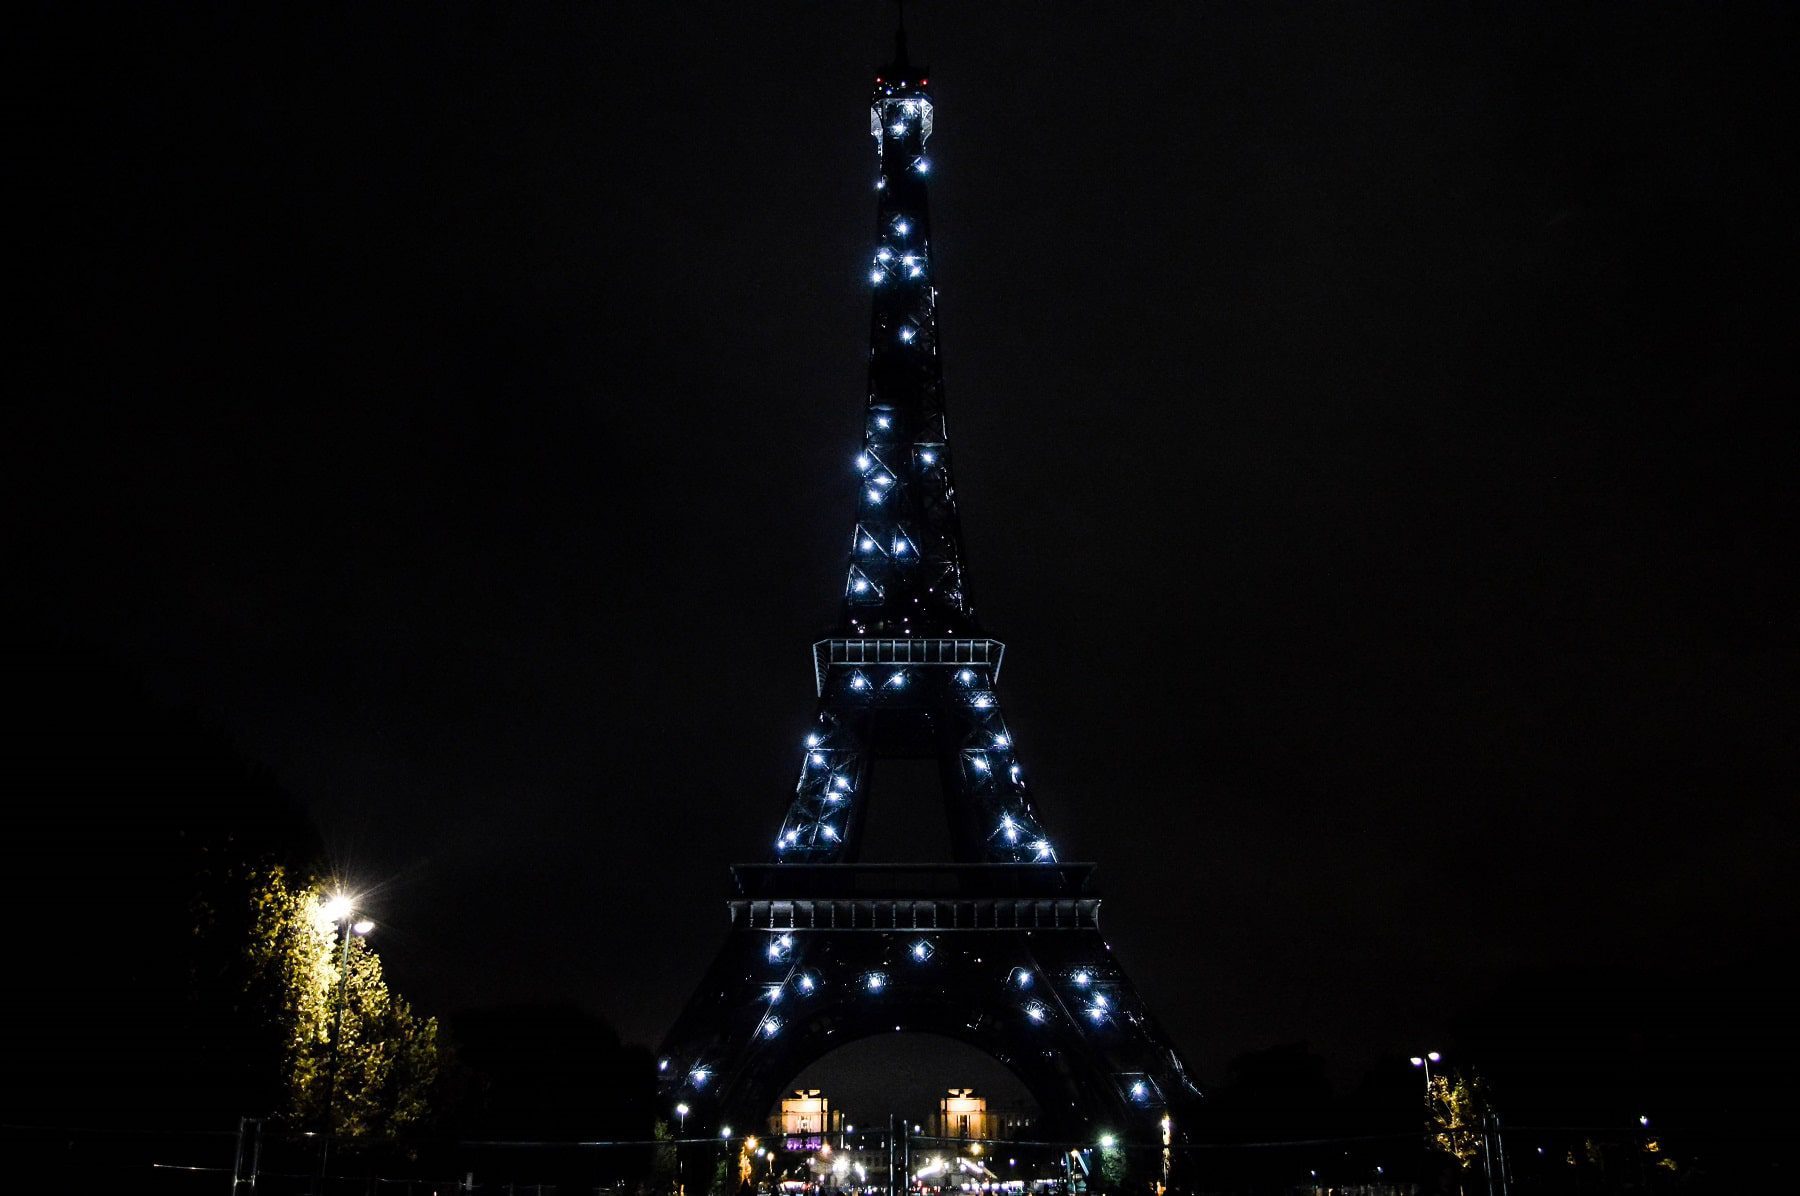 The Eiffel tower light up at night